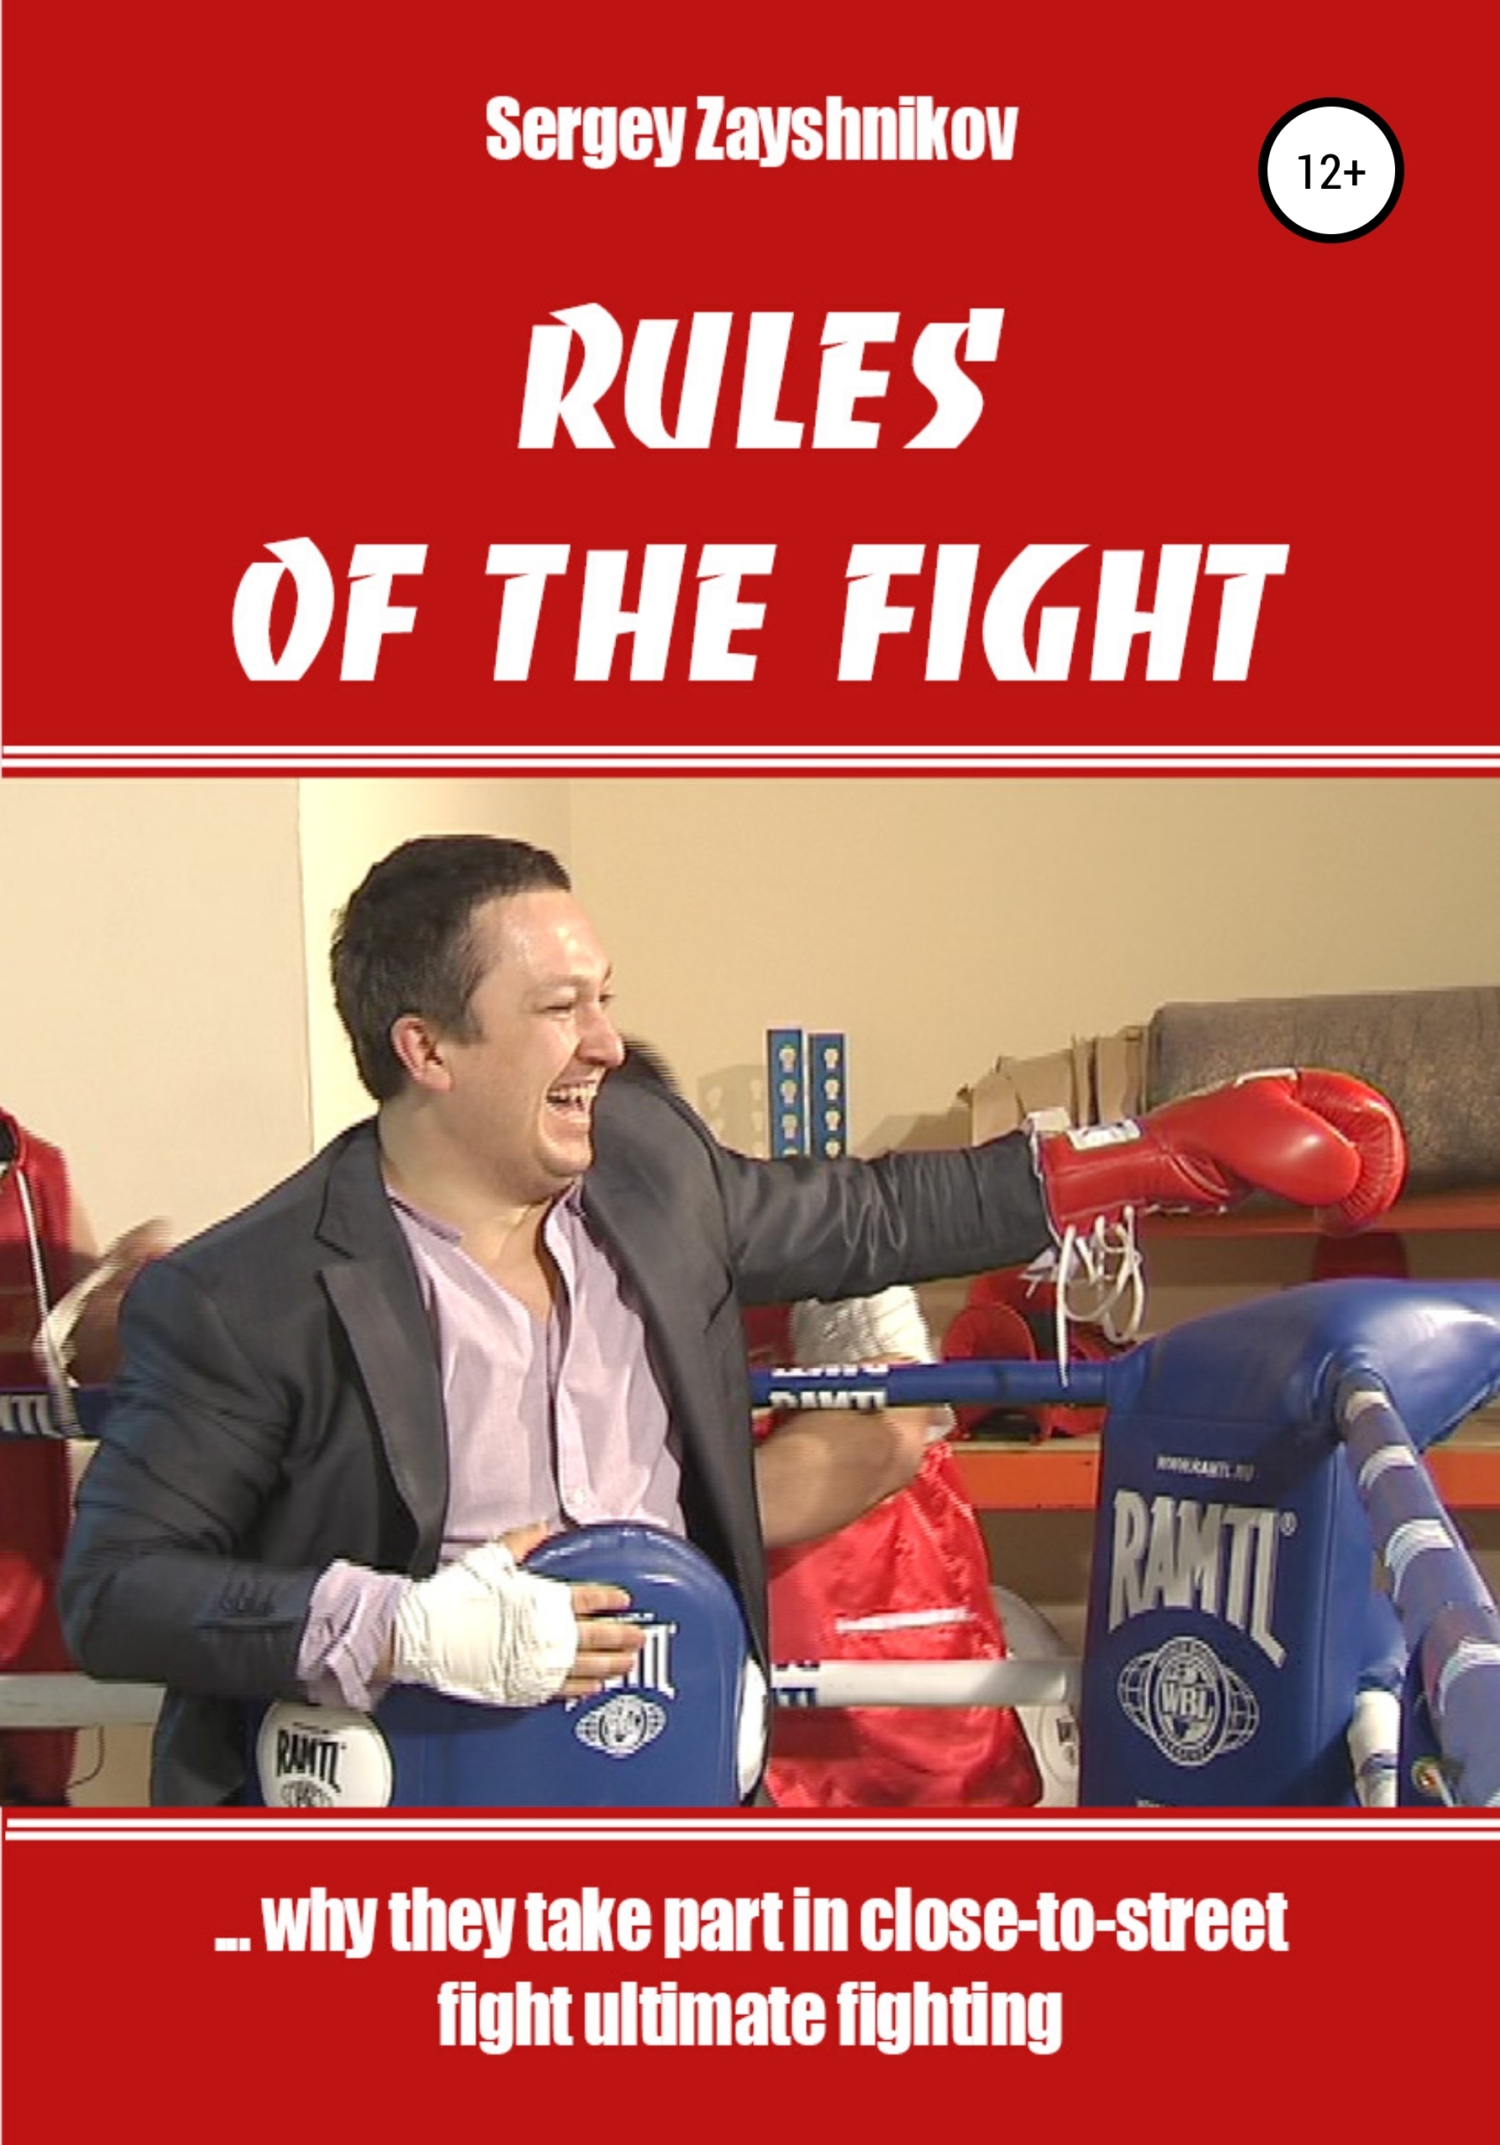 RULES OF THE FIGHT. «…why they take part in close-to-street fight ultimate fighting» - Сергей Иванович Заяшников